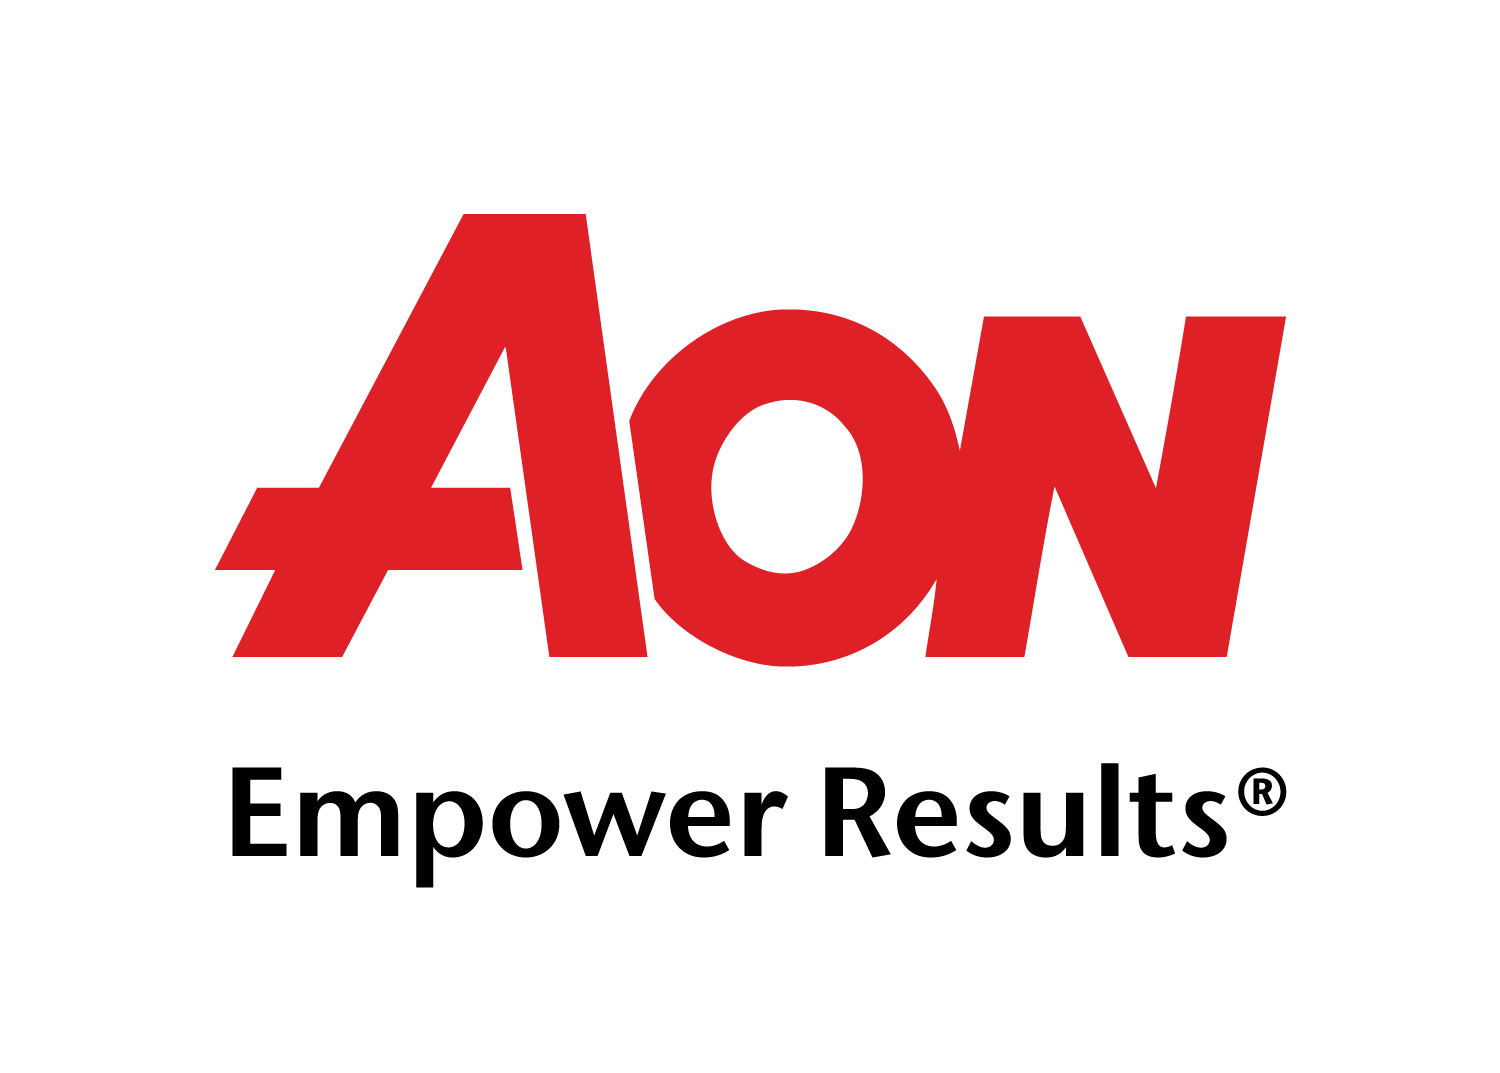 Aon Risk Solutions